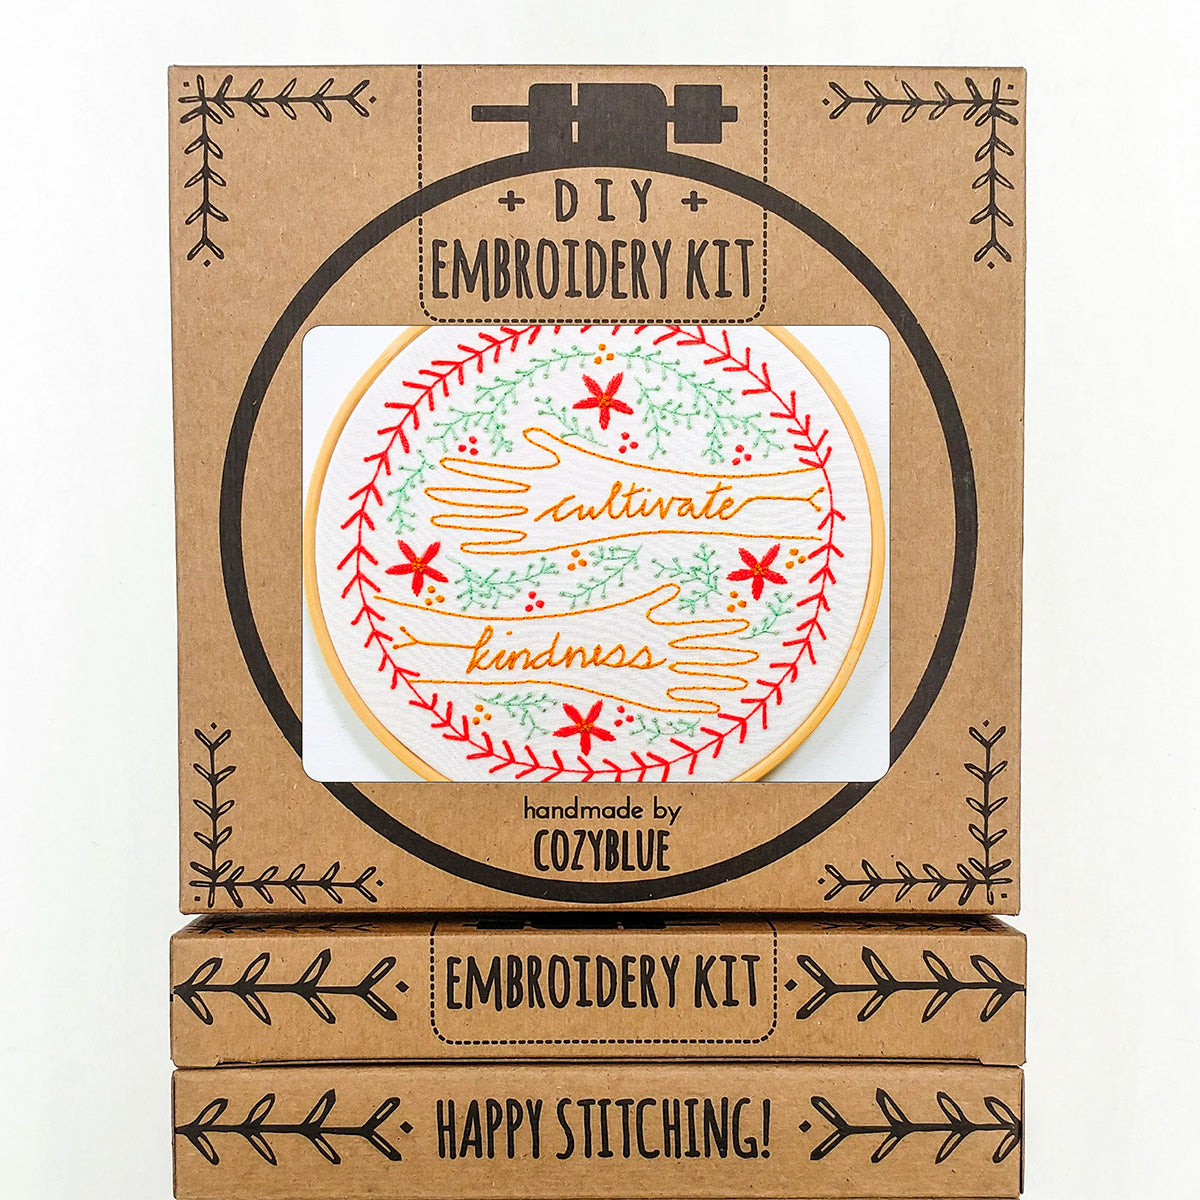 Cultivate Kindness Hand Embroidery Kit